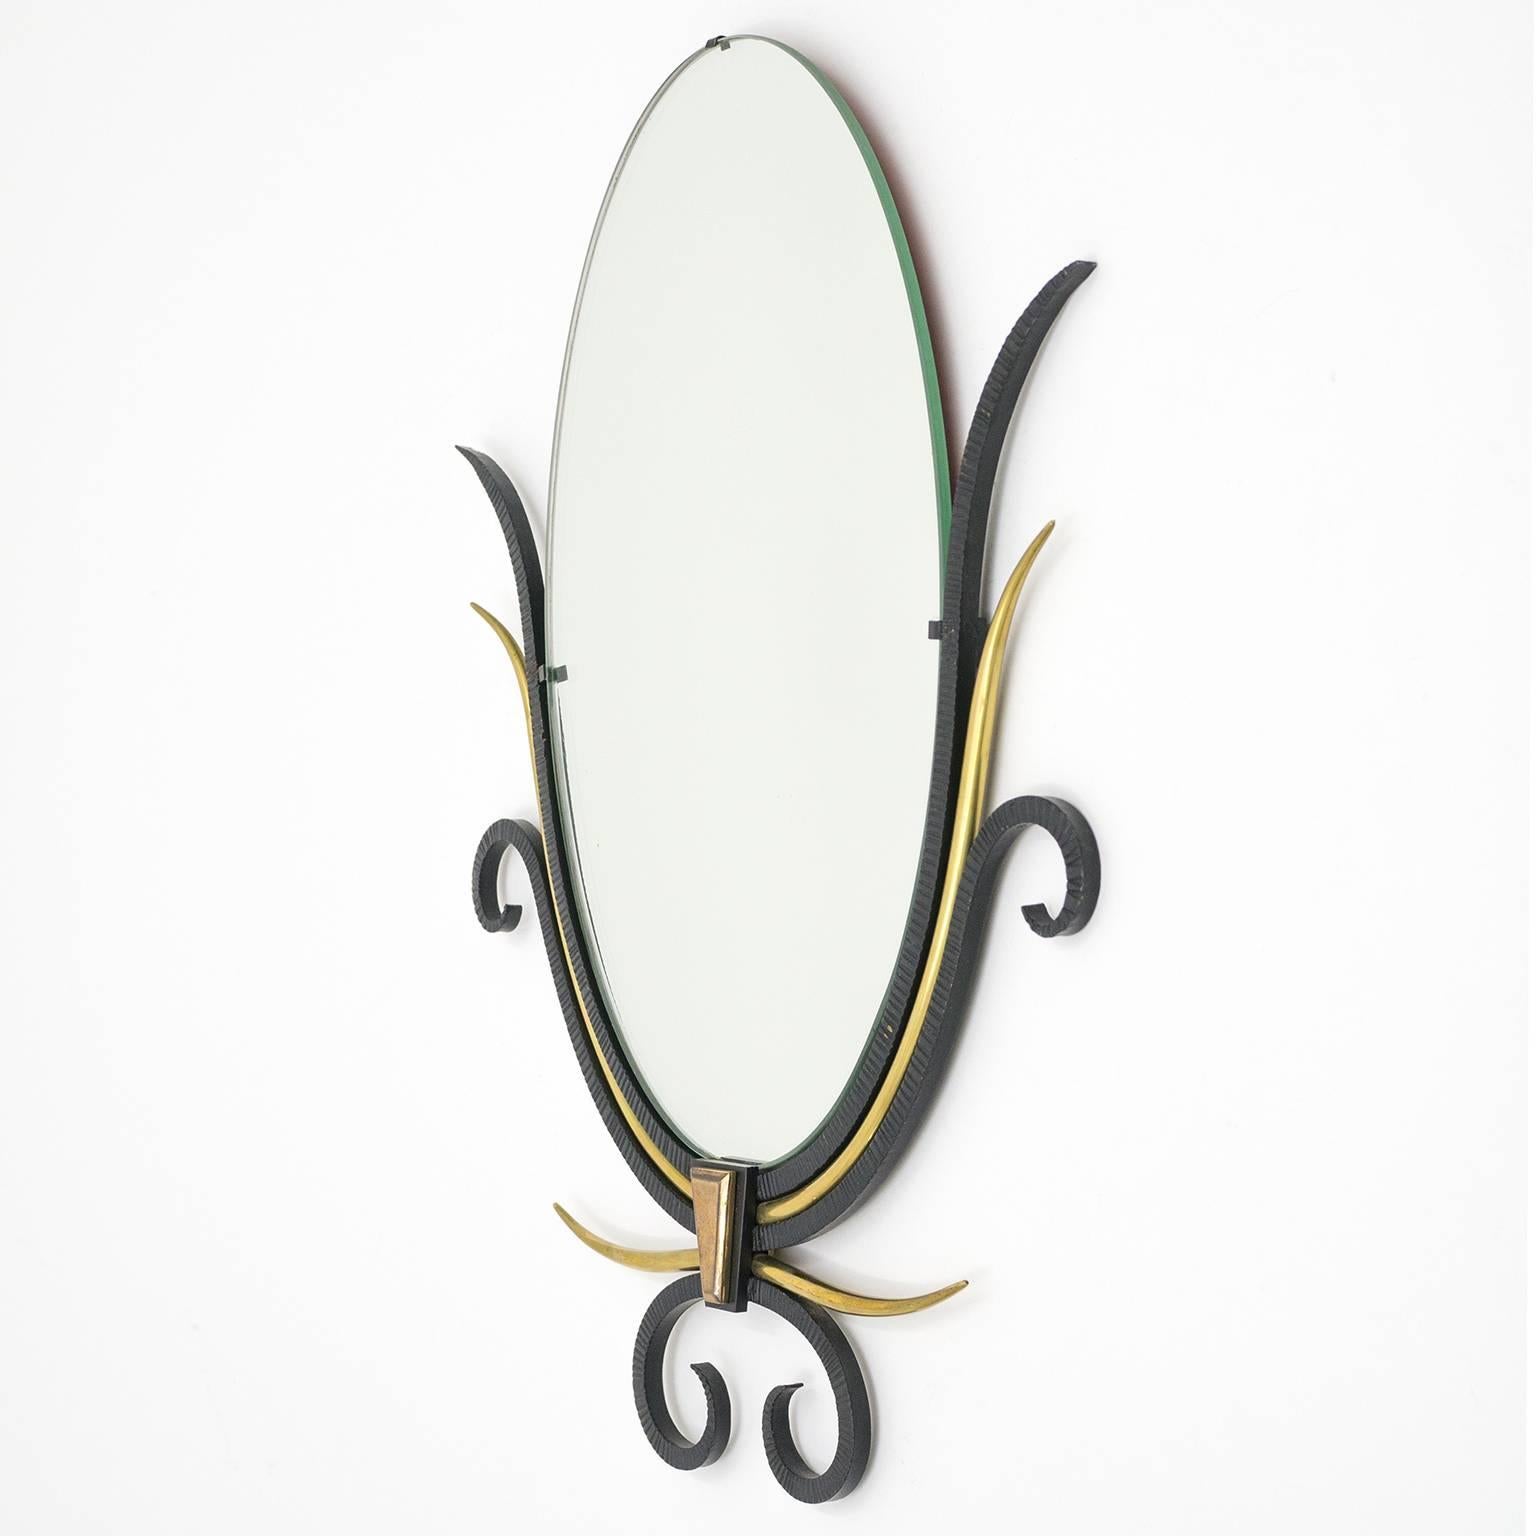 Mid-20th Century French Art Deco Wrought Iron and Brass Mirrors, 1930s